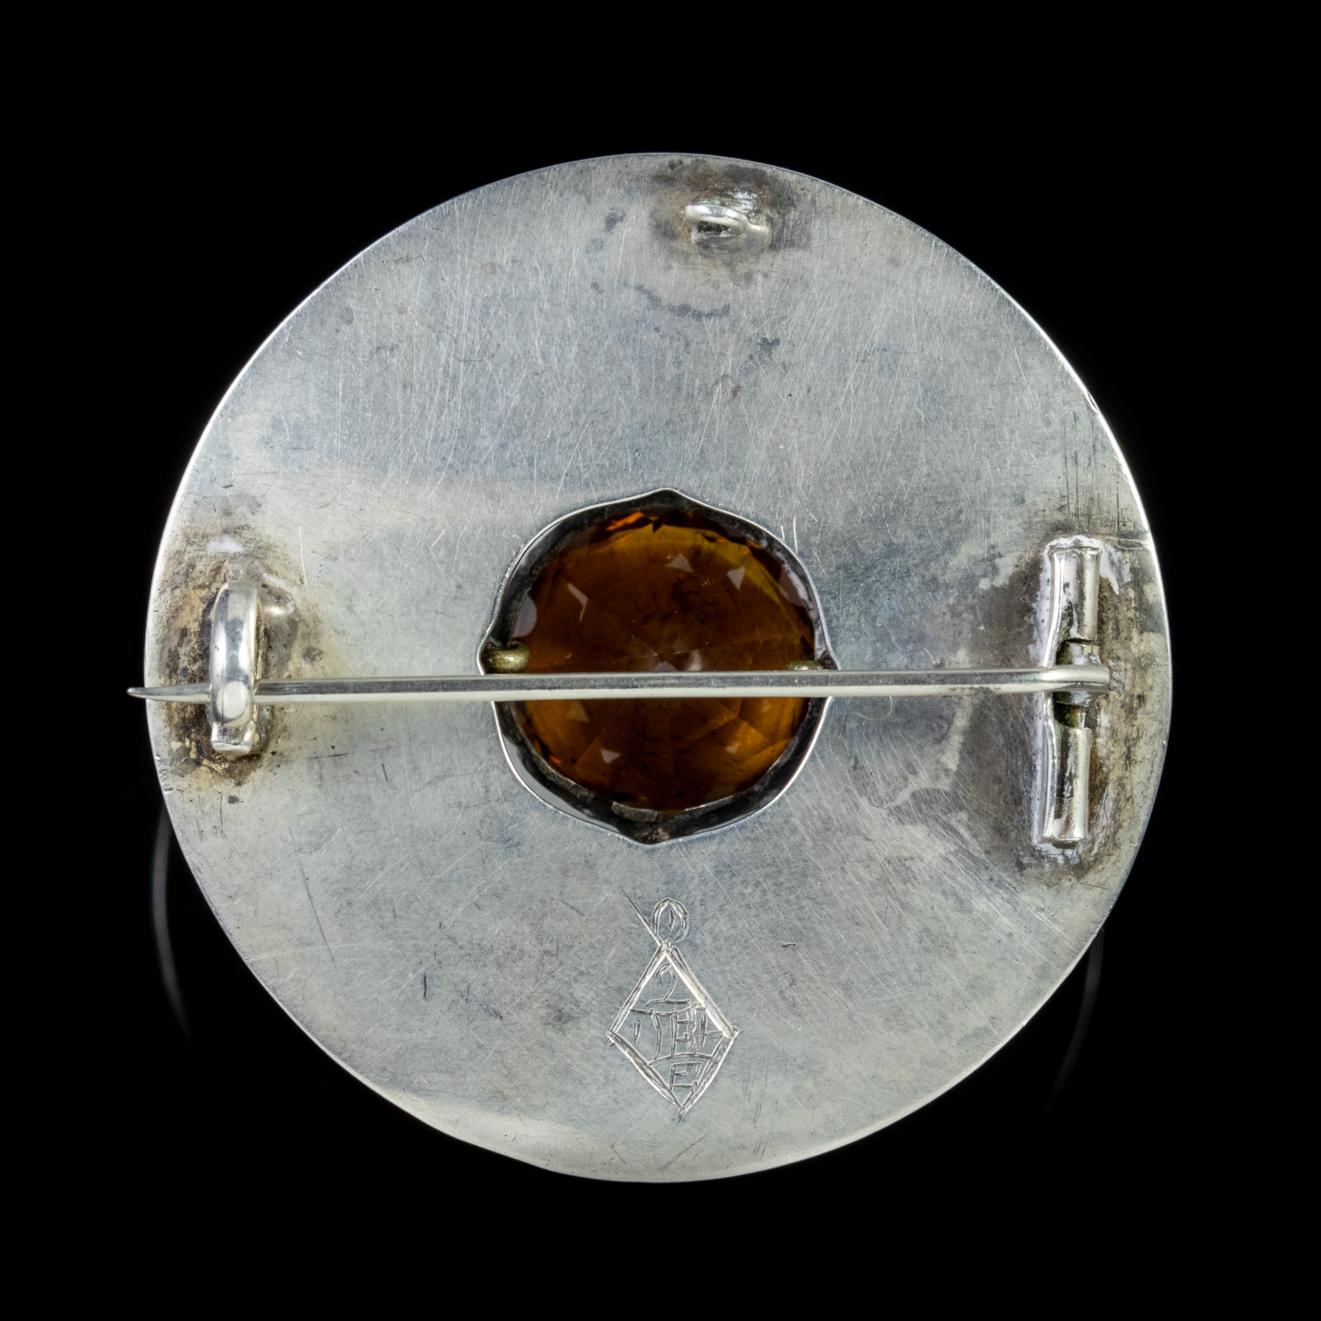 This beautiful Scottish Victorian brooch is crafted around a large Cairngorm, with rings of green and orange Agate radiating outwards.

The Cairngorm stones are sourced from the Cairngorm mountains in Scotland and have a lovely treacle coloured hue